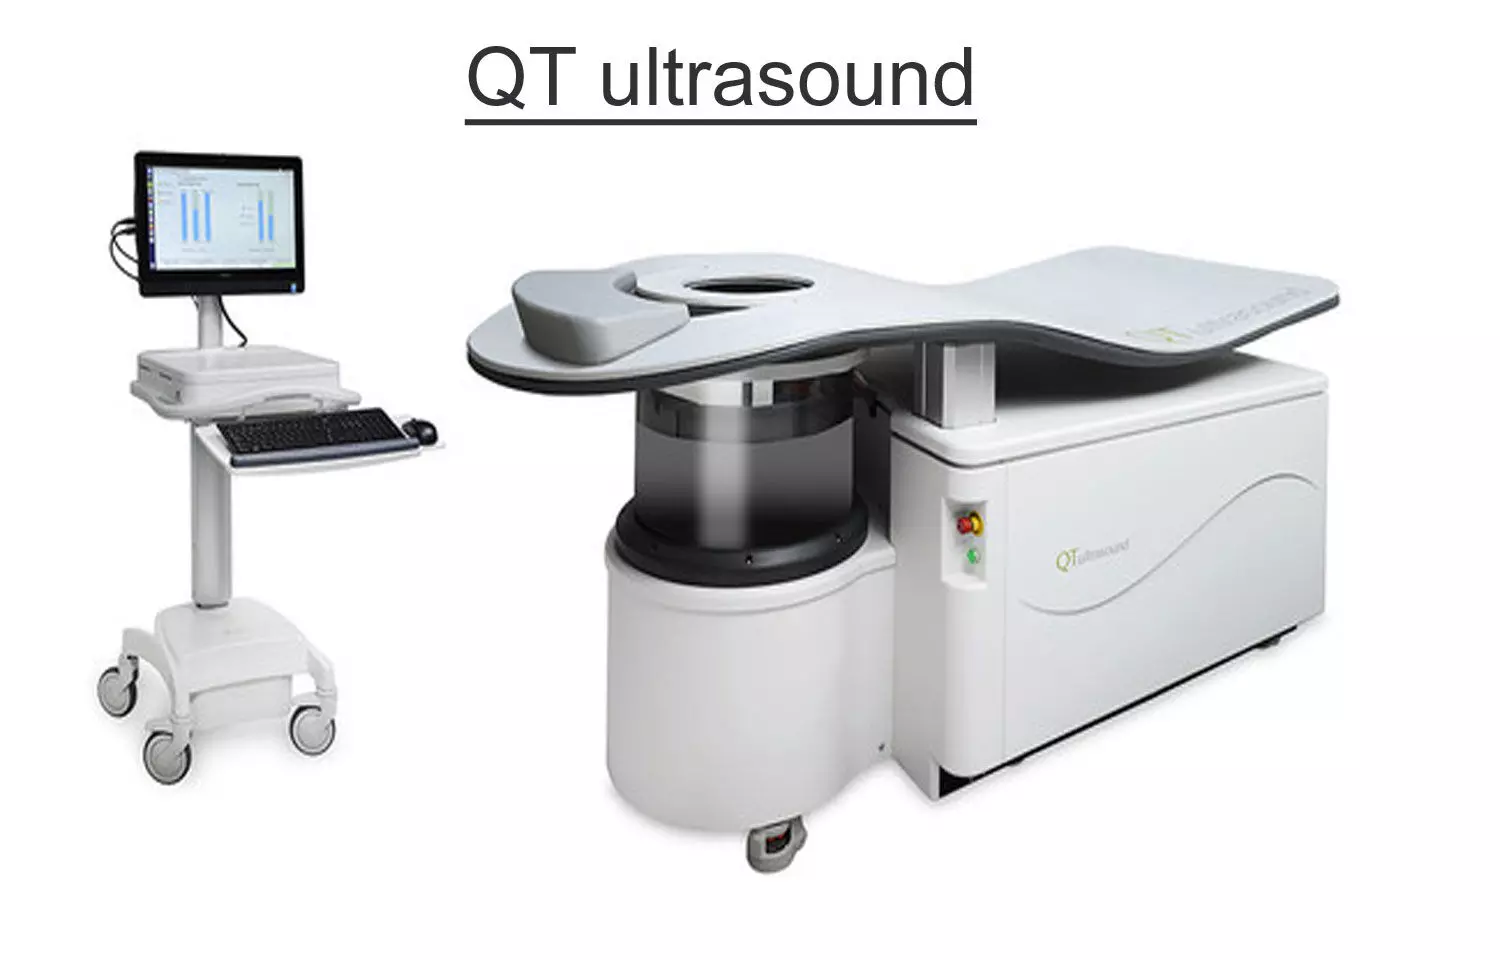 QT ultrasound performs better than Mammography for cancer screening in new study